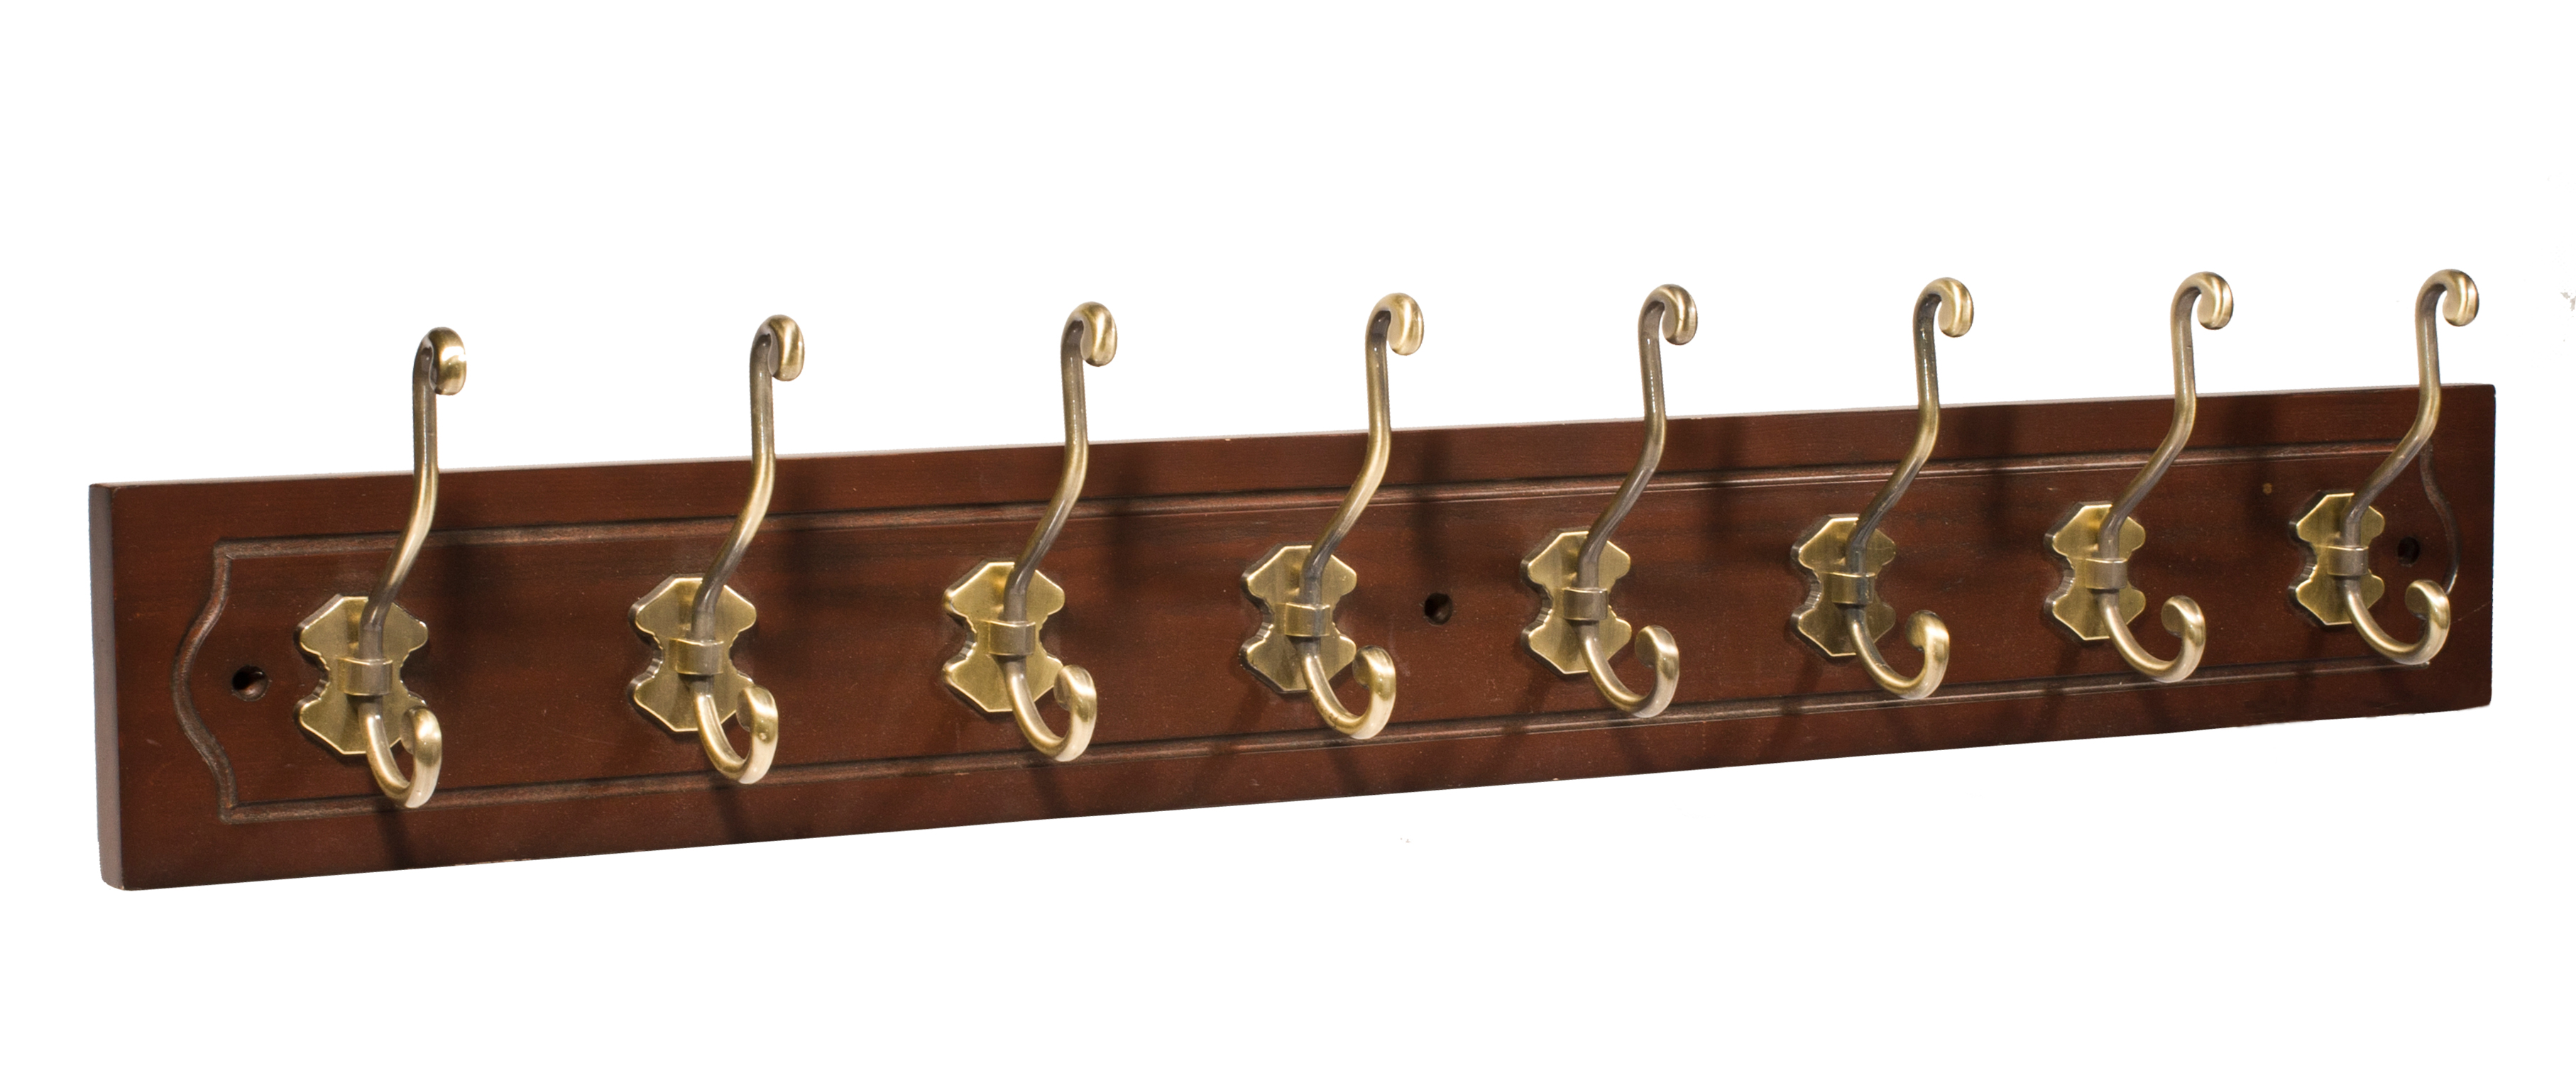 8 Hat & Coat Hook Rail Cathedral Style, Antique Brass & Antique Effect